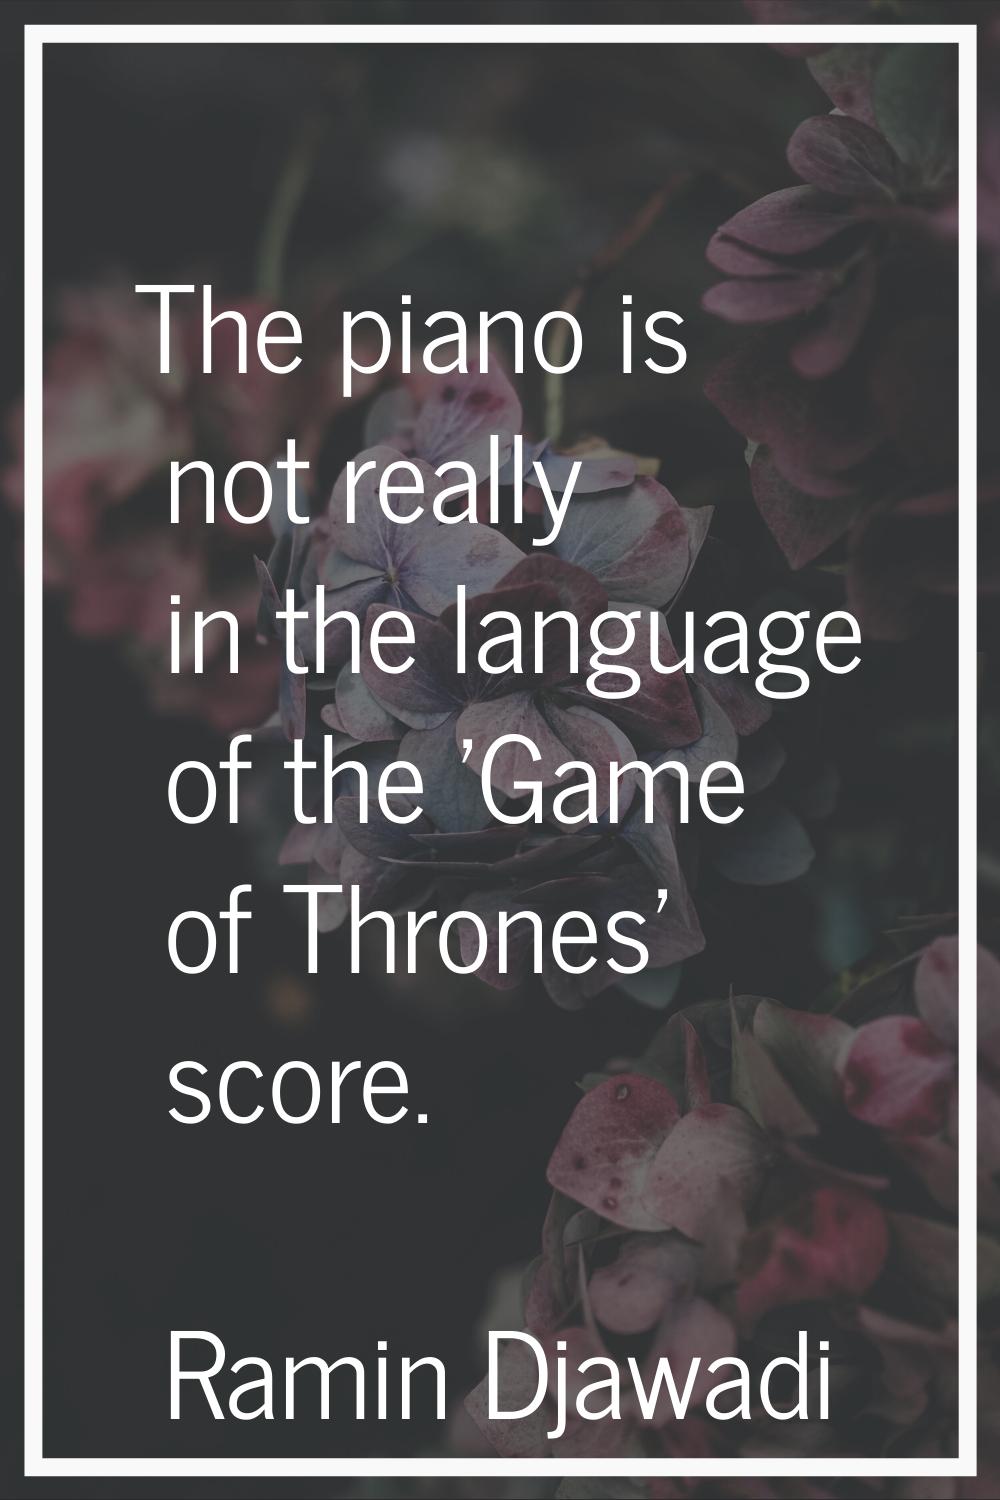 The piano is not really in the language of the 'Game of Thrones' score.